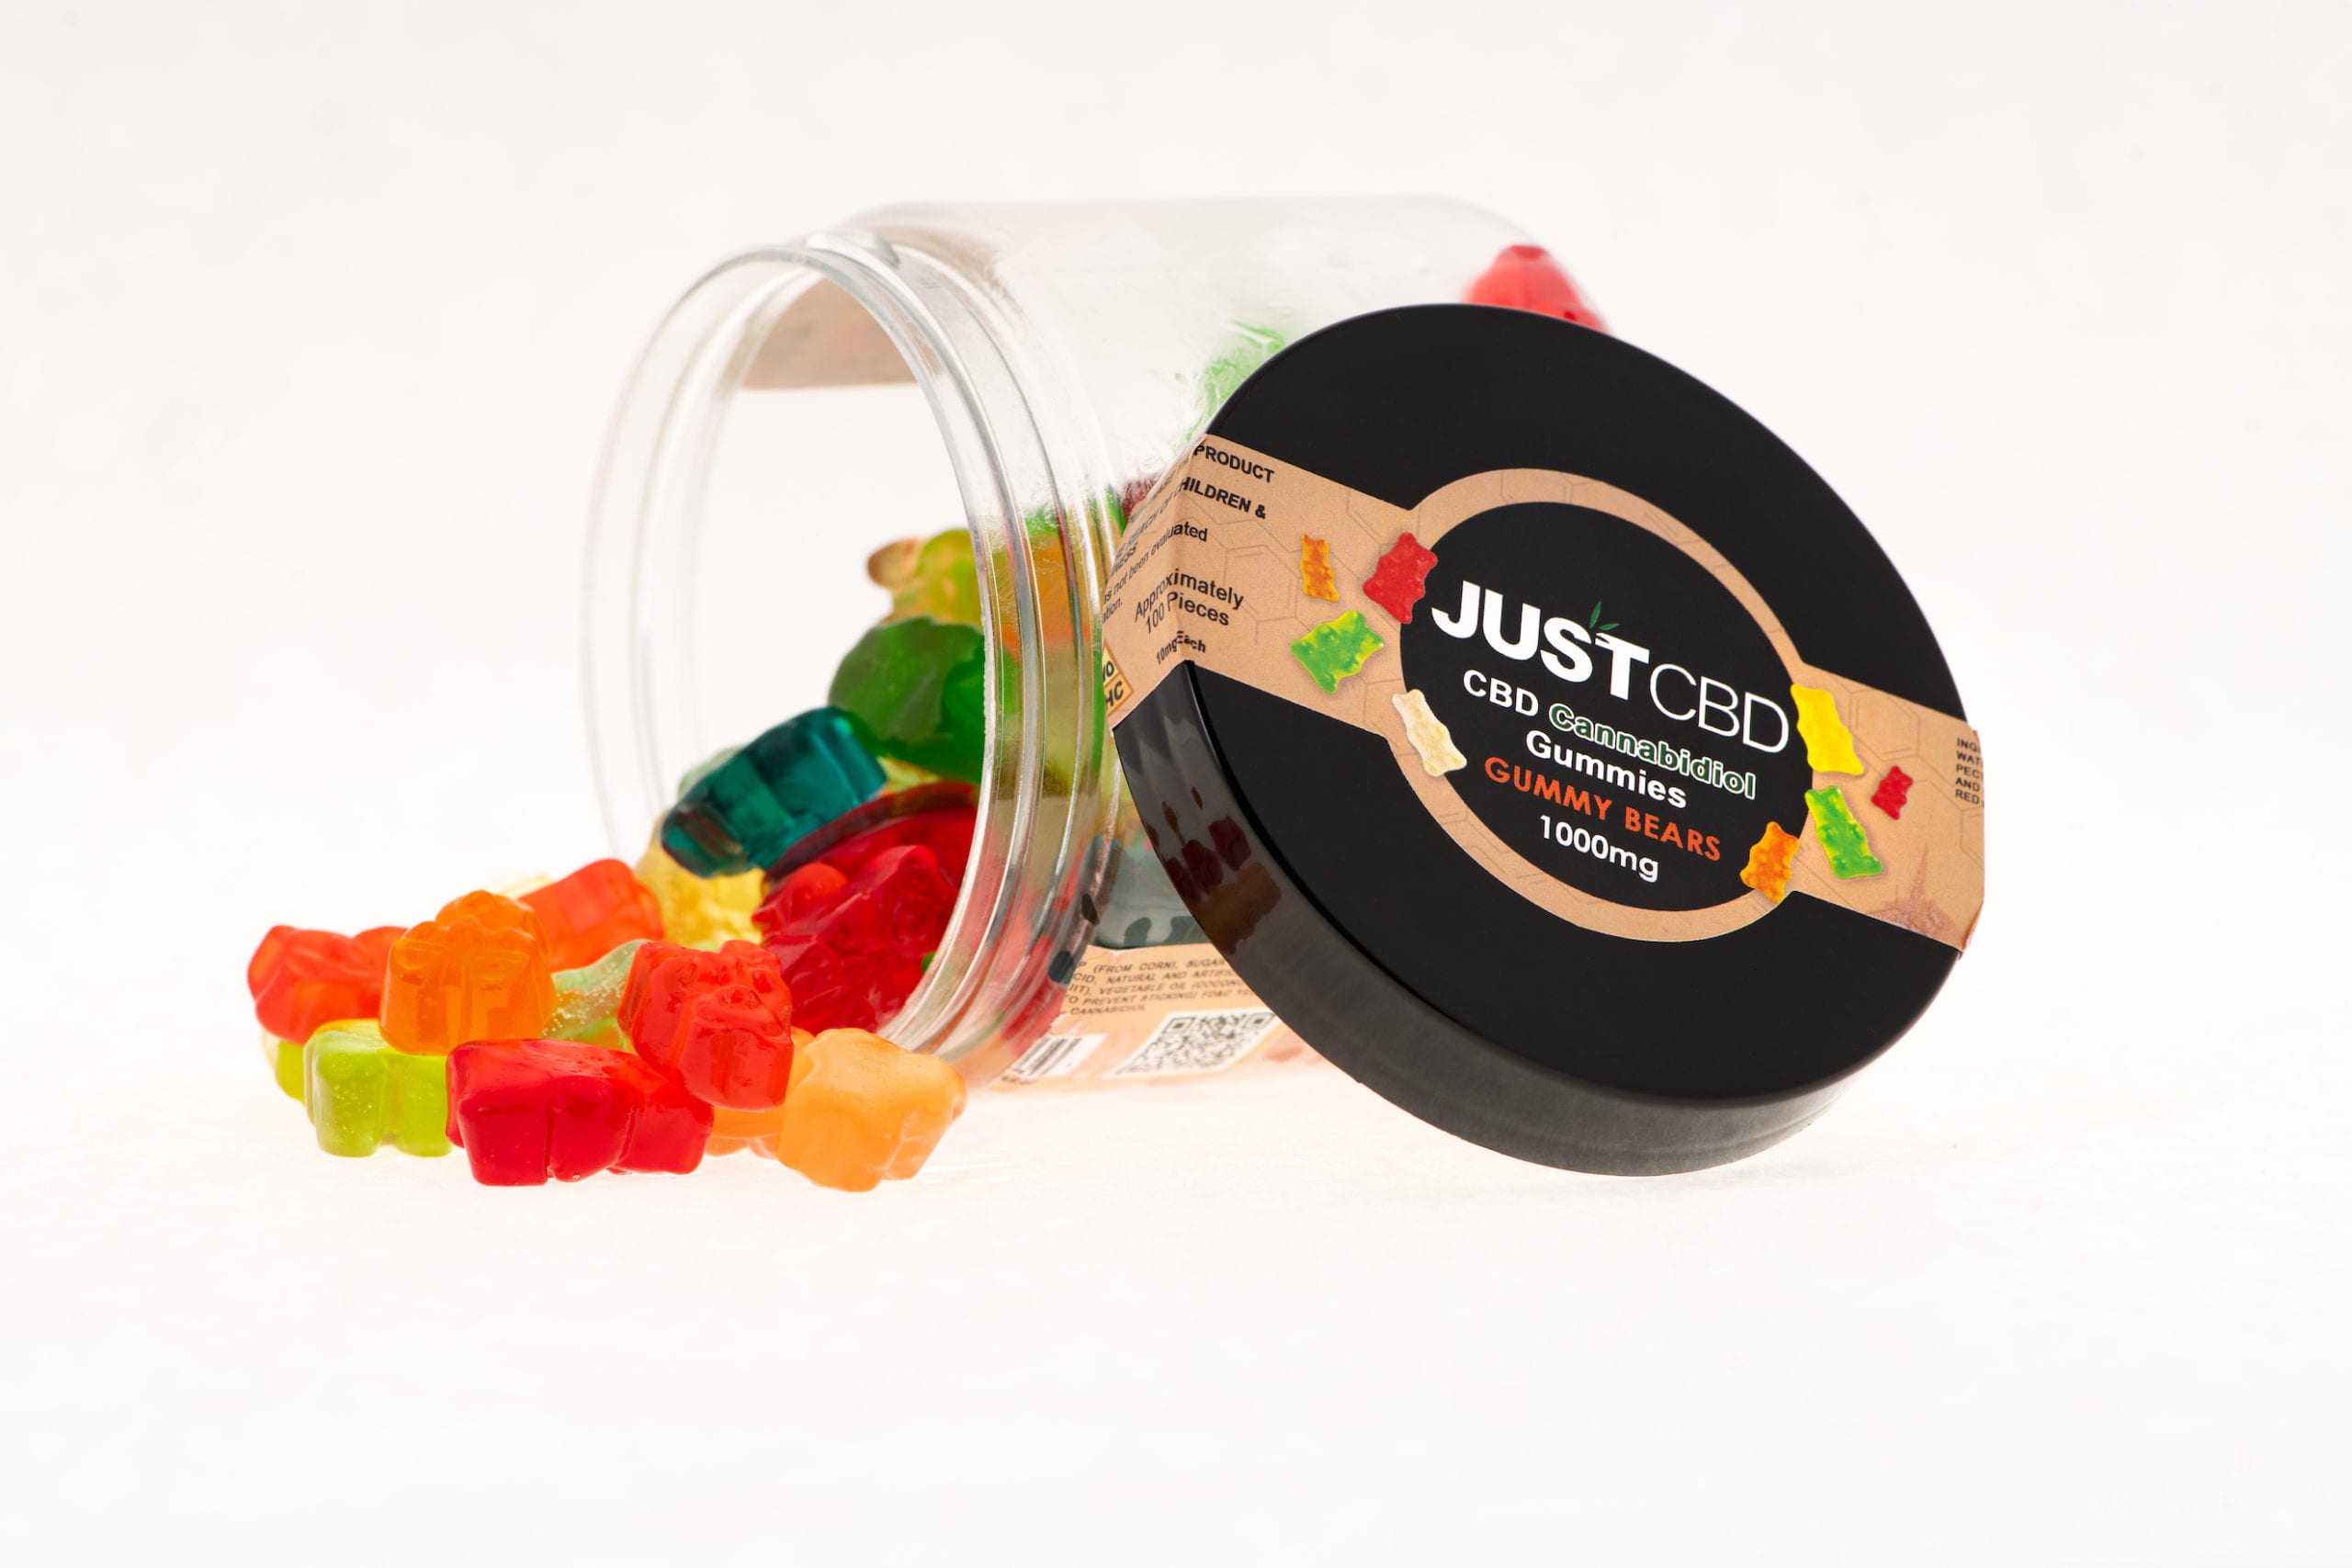 JustCBD Product Photography and Just CBD Products gummy bears on display